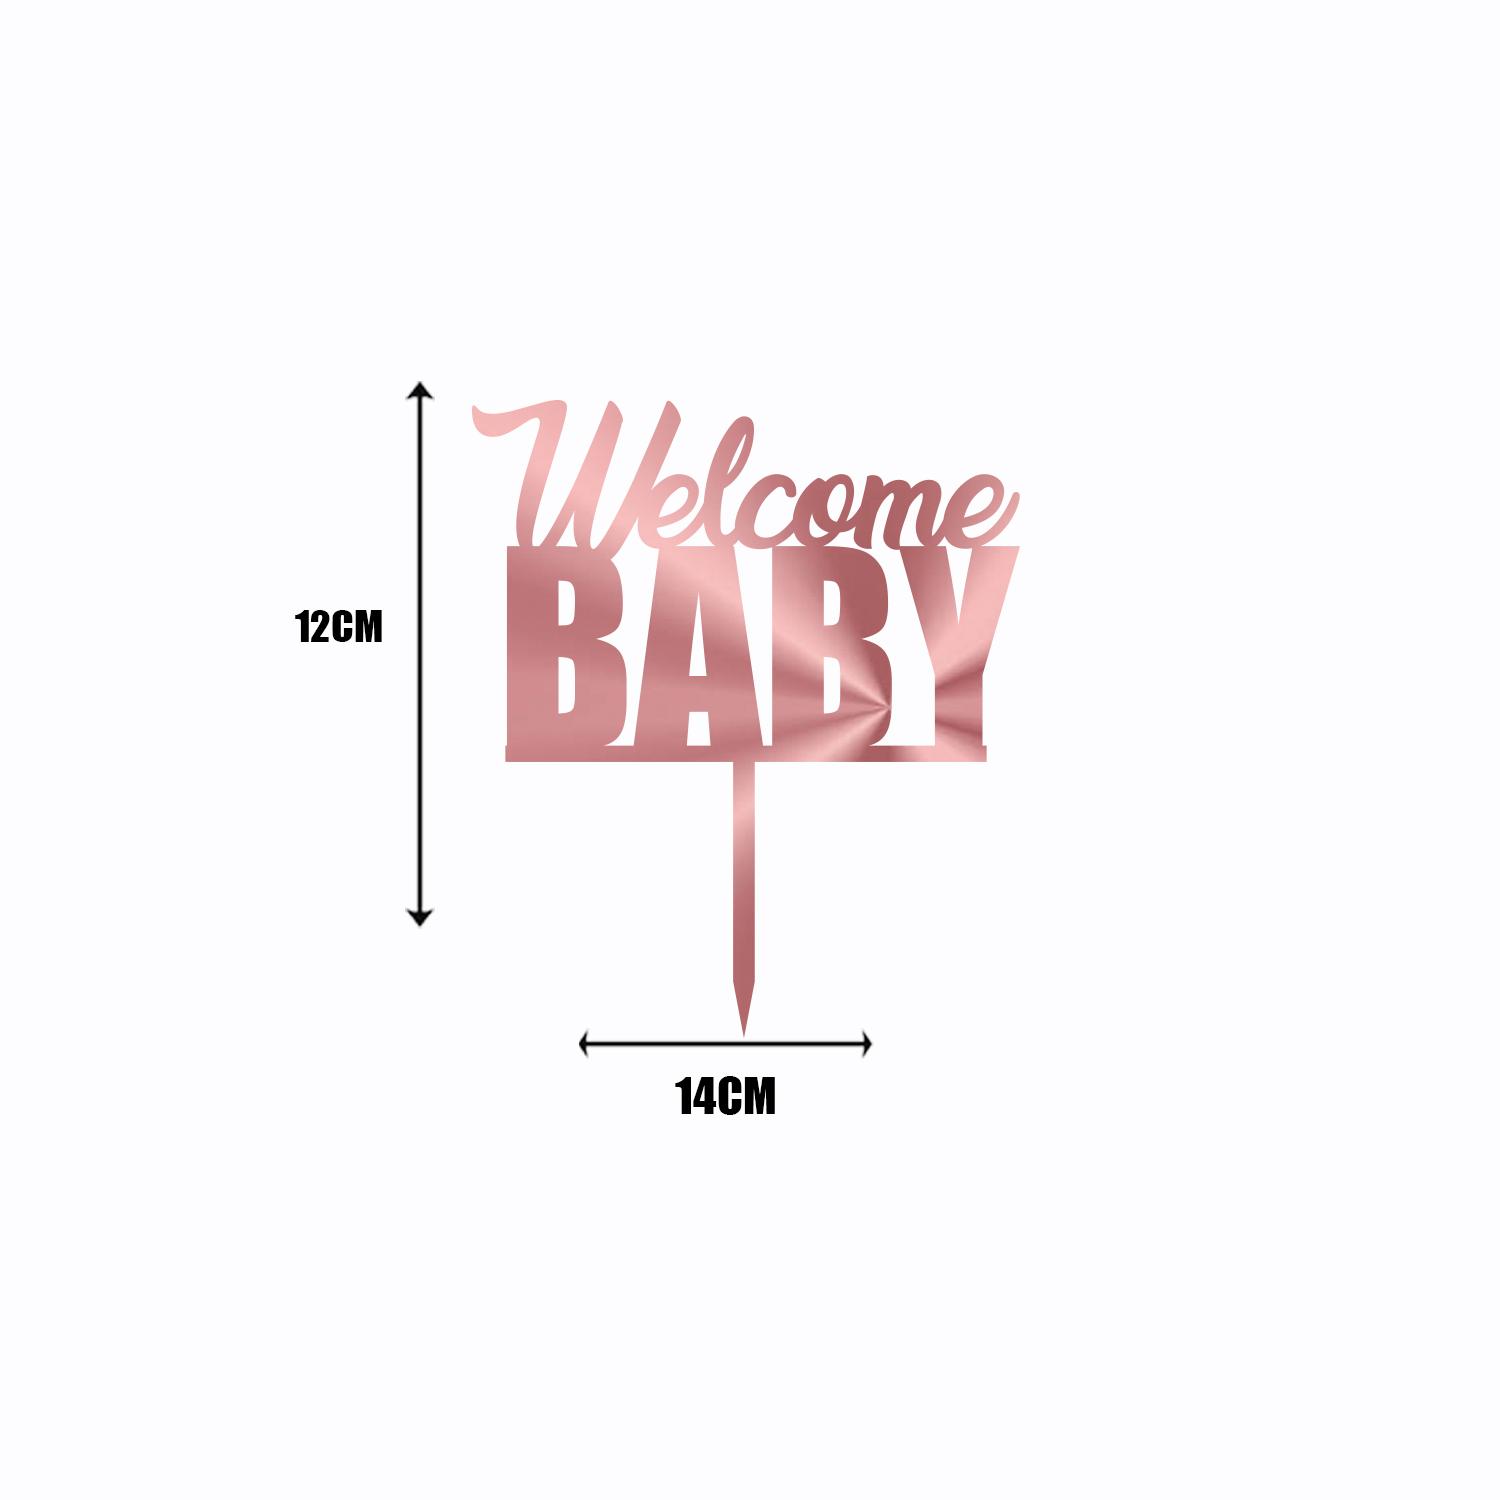 ROSE GOLD ACRYLIC BABY SHOWER TOPPER WELCOME BABY